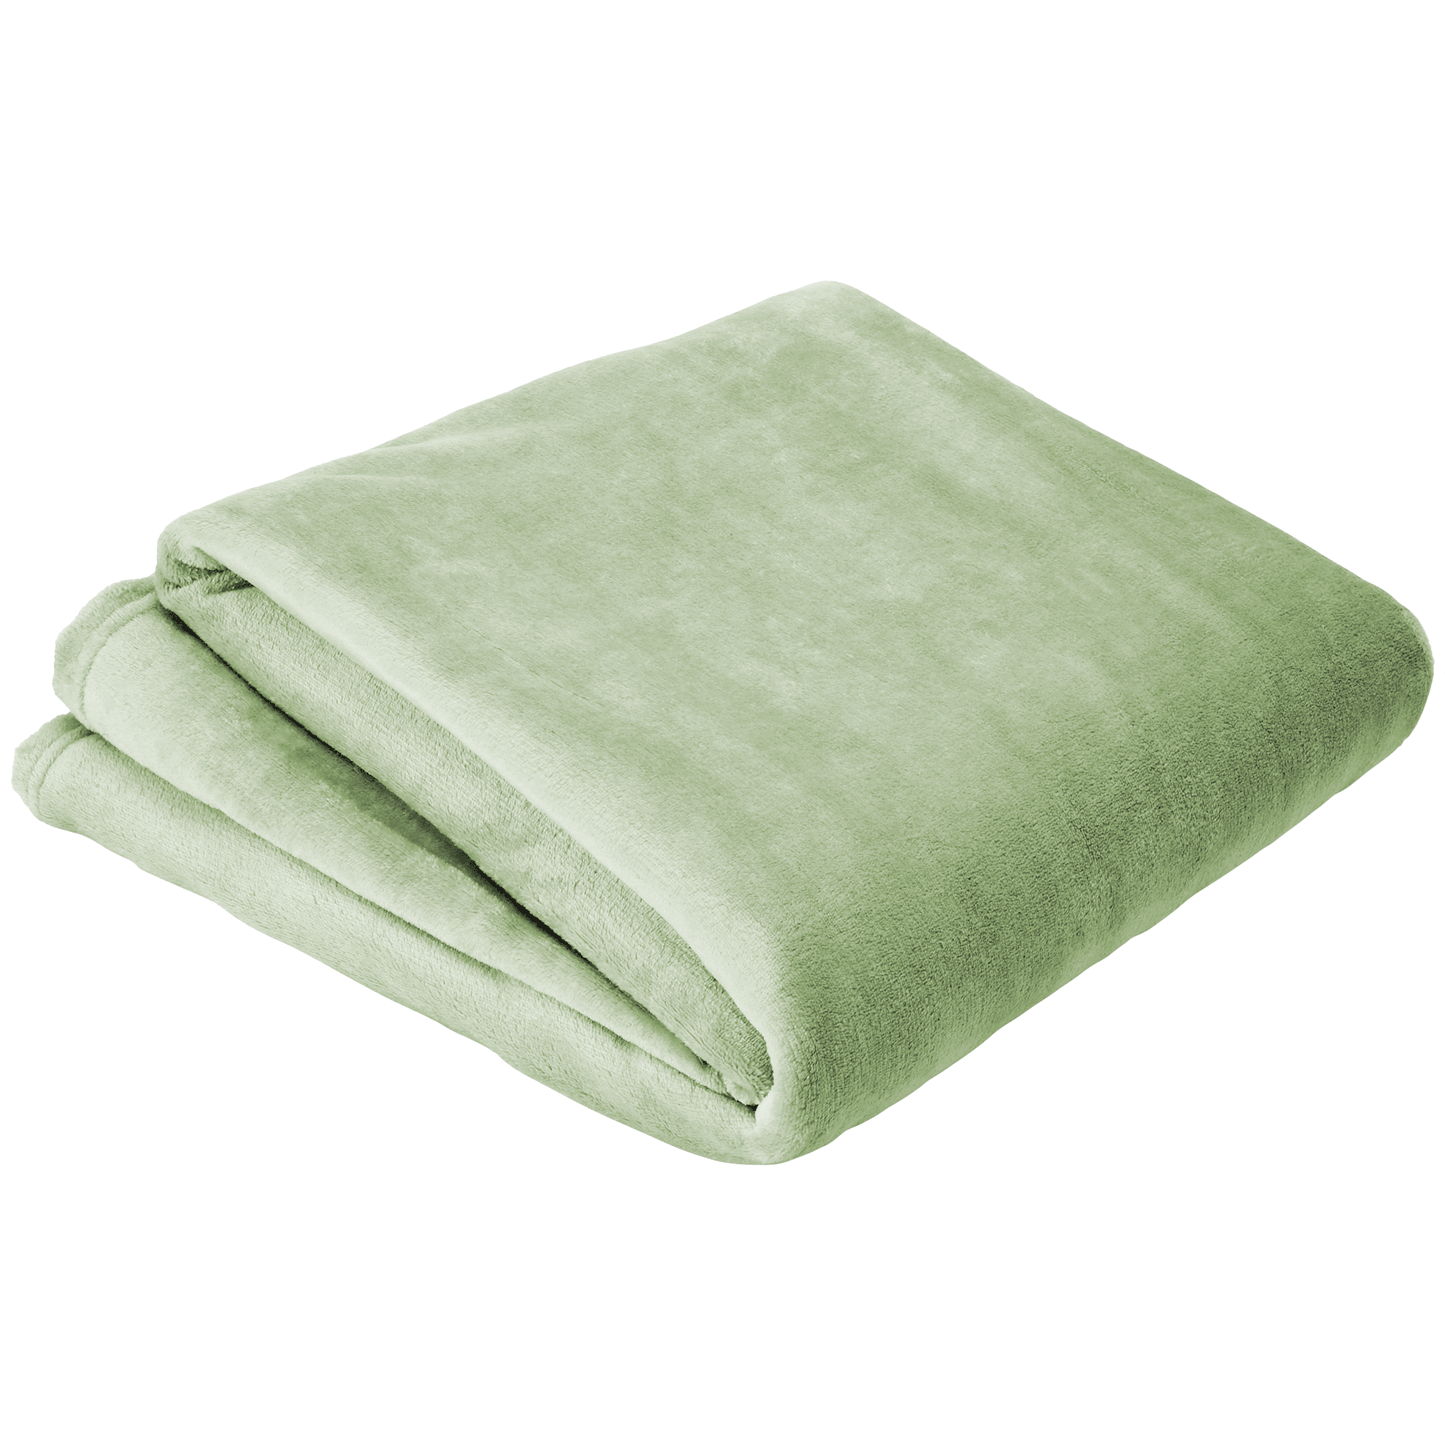 Flannel Fleece Throw Blanket Super Soft Warm Fluffy For Bed Sofa Couch Chair OLIVIA ROCCO Throw